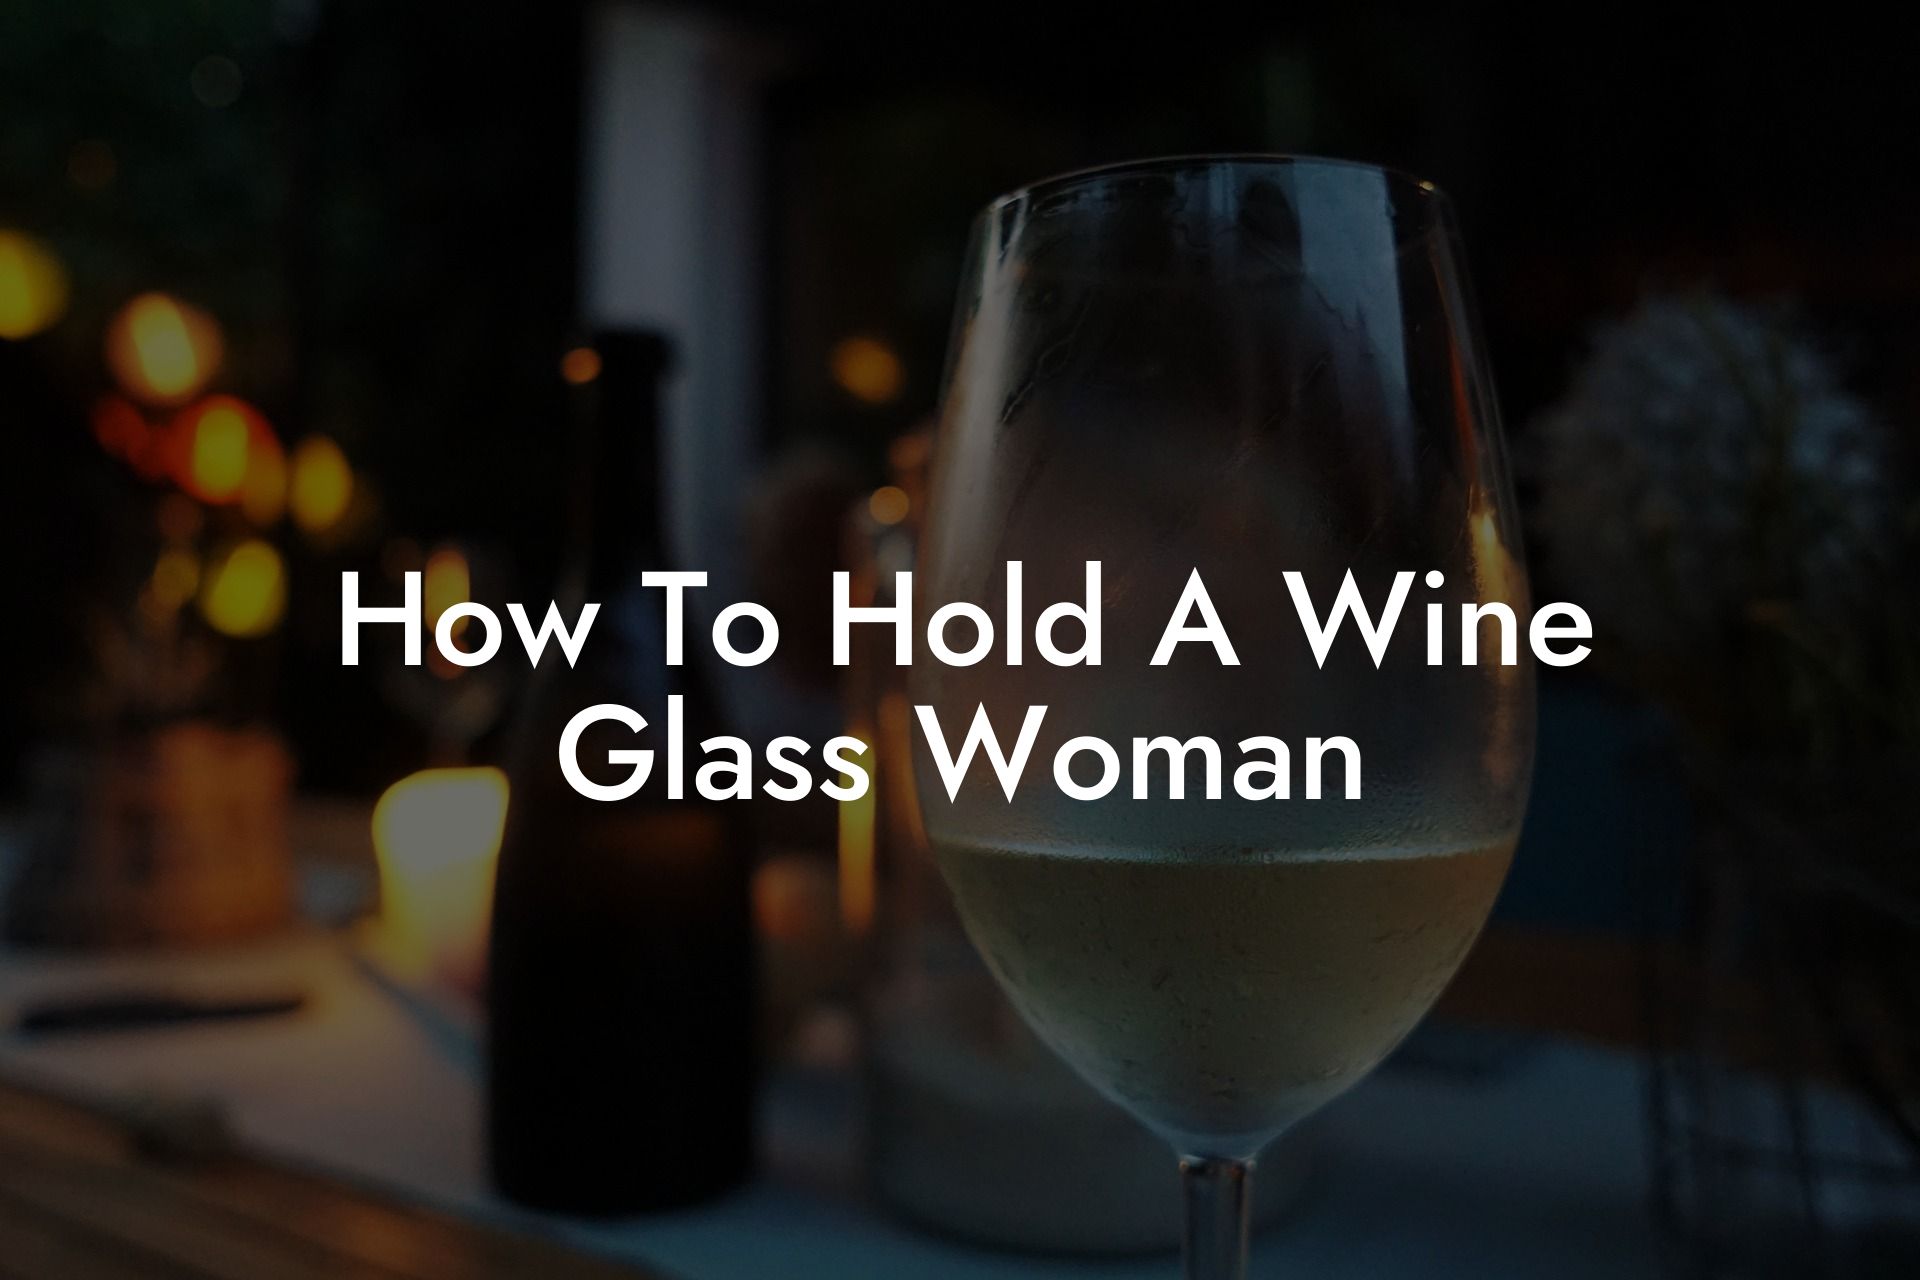 How To Hold A Wine Glass Woman